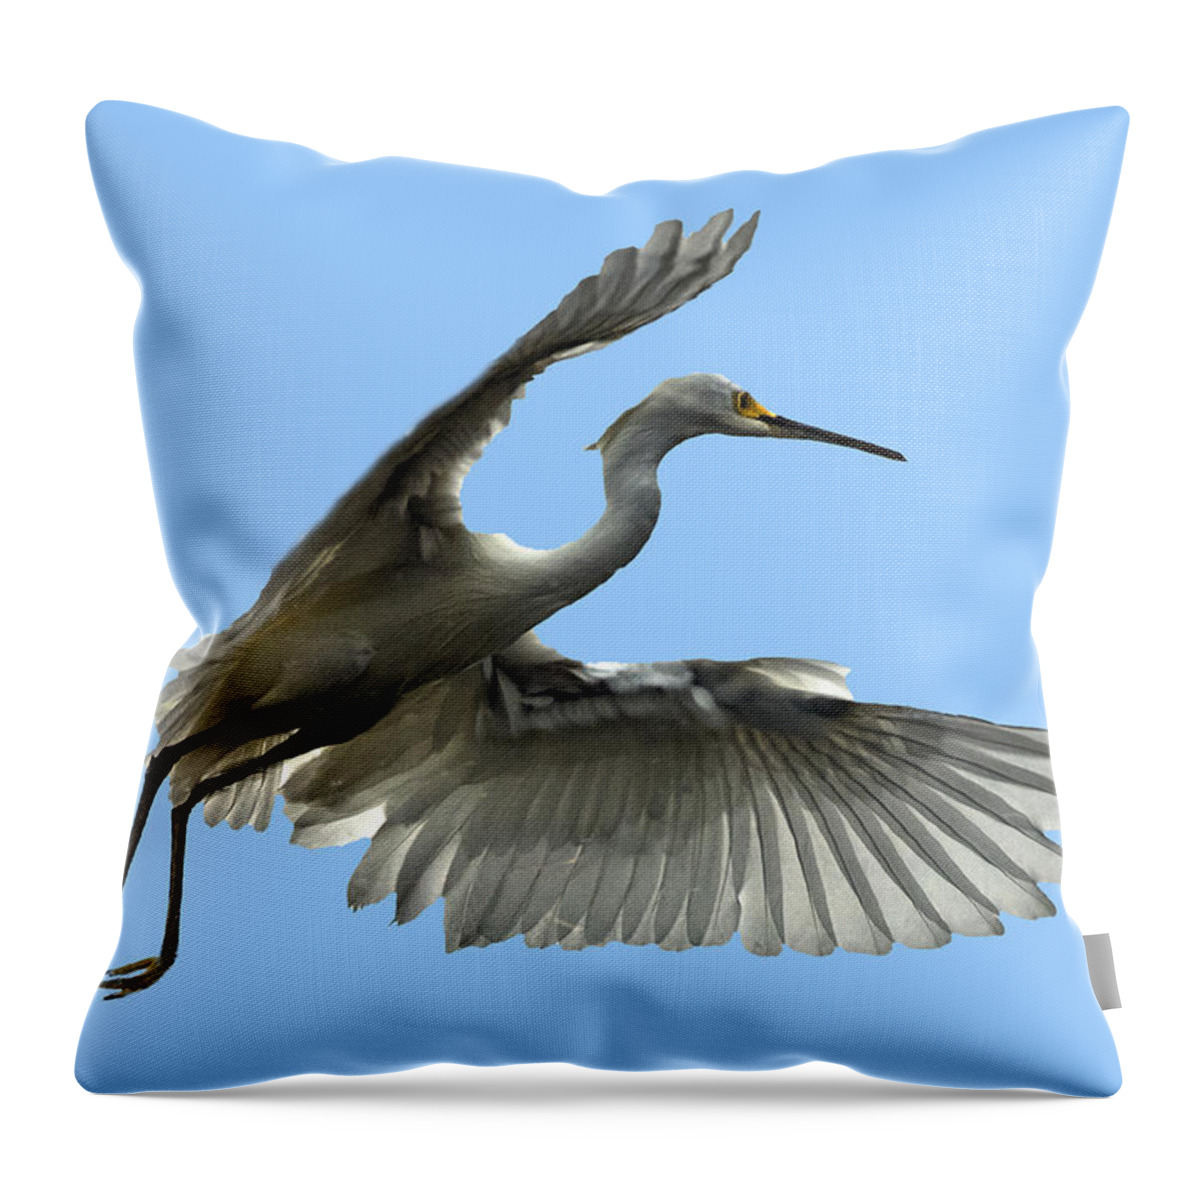 Snowy Egret Throw Pillow featuring the photograph Snowy Egret Reflection In Lake by William Bitman